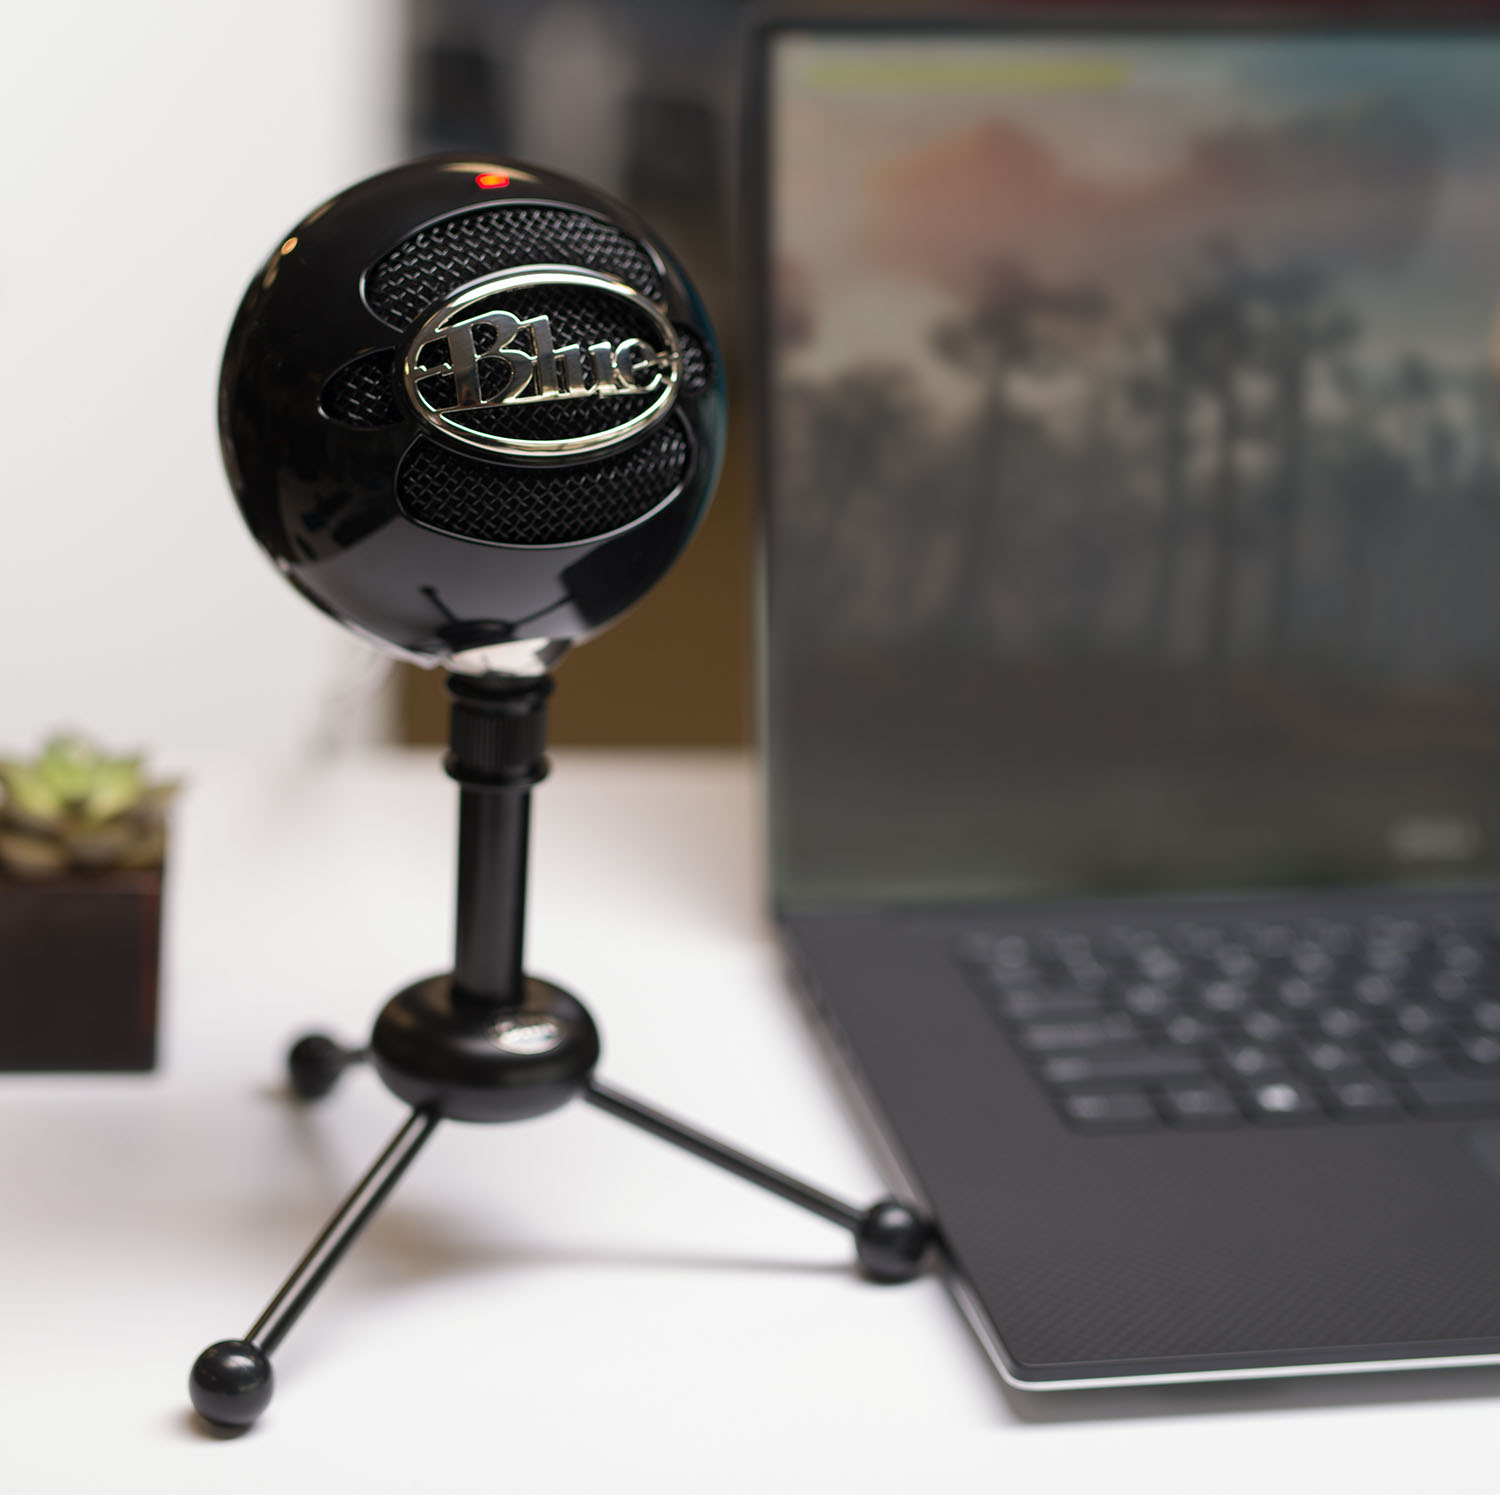 Blue Snowball review: A classic for a reason